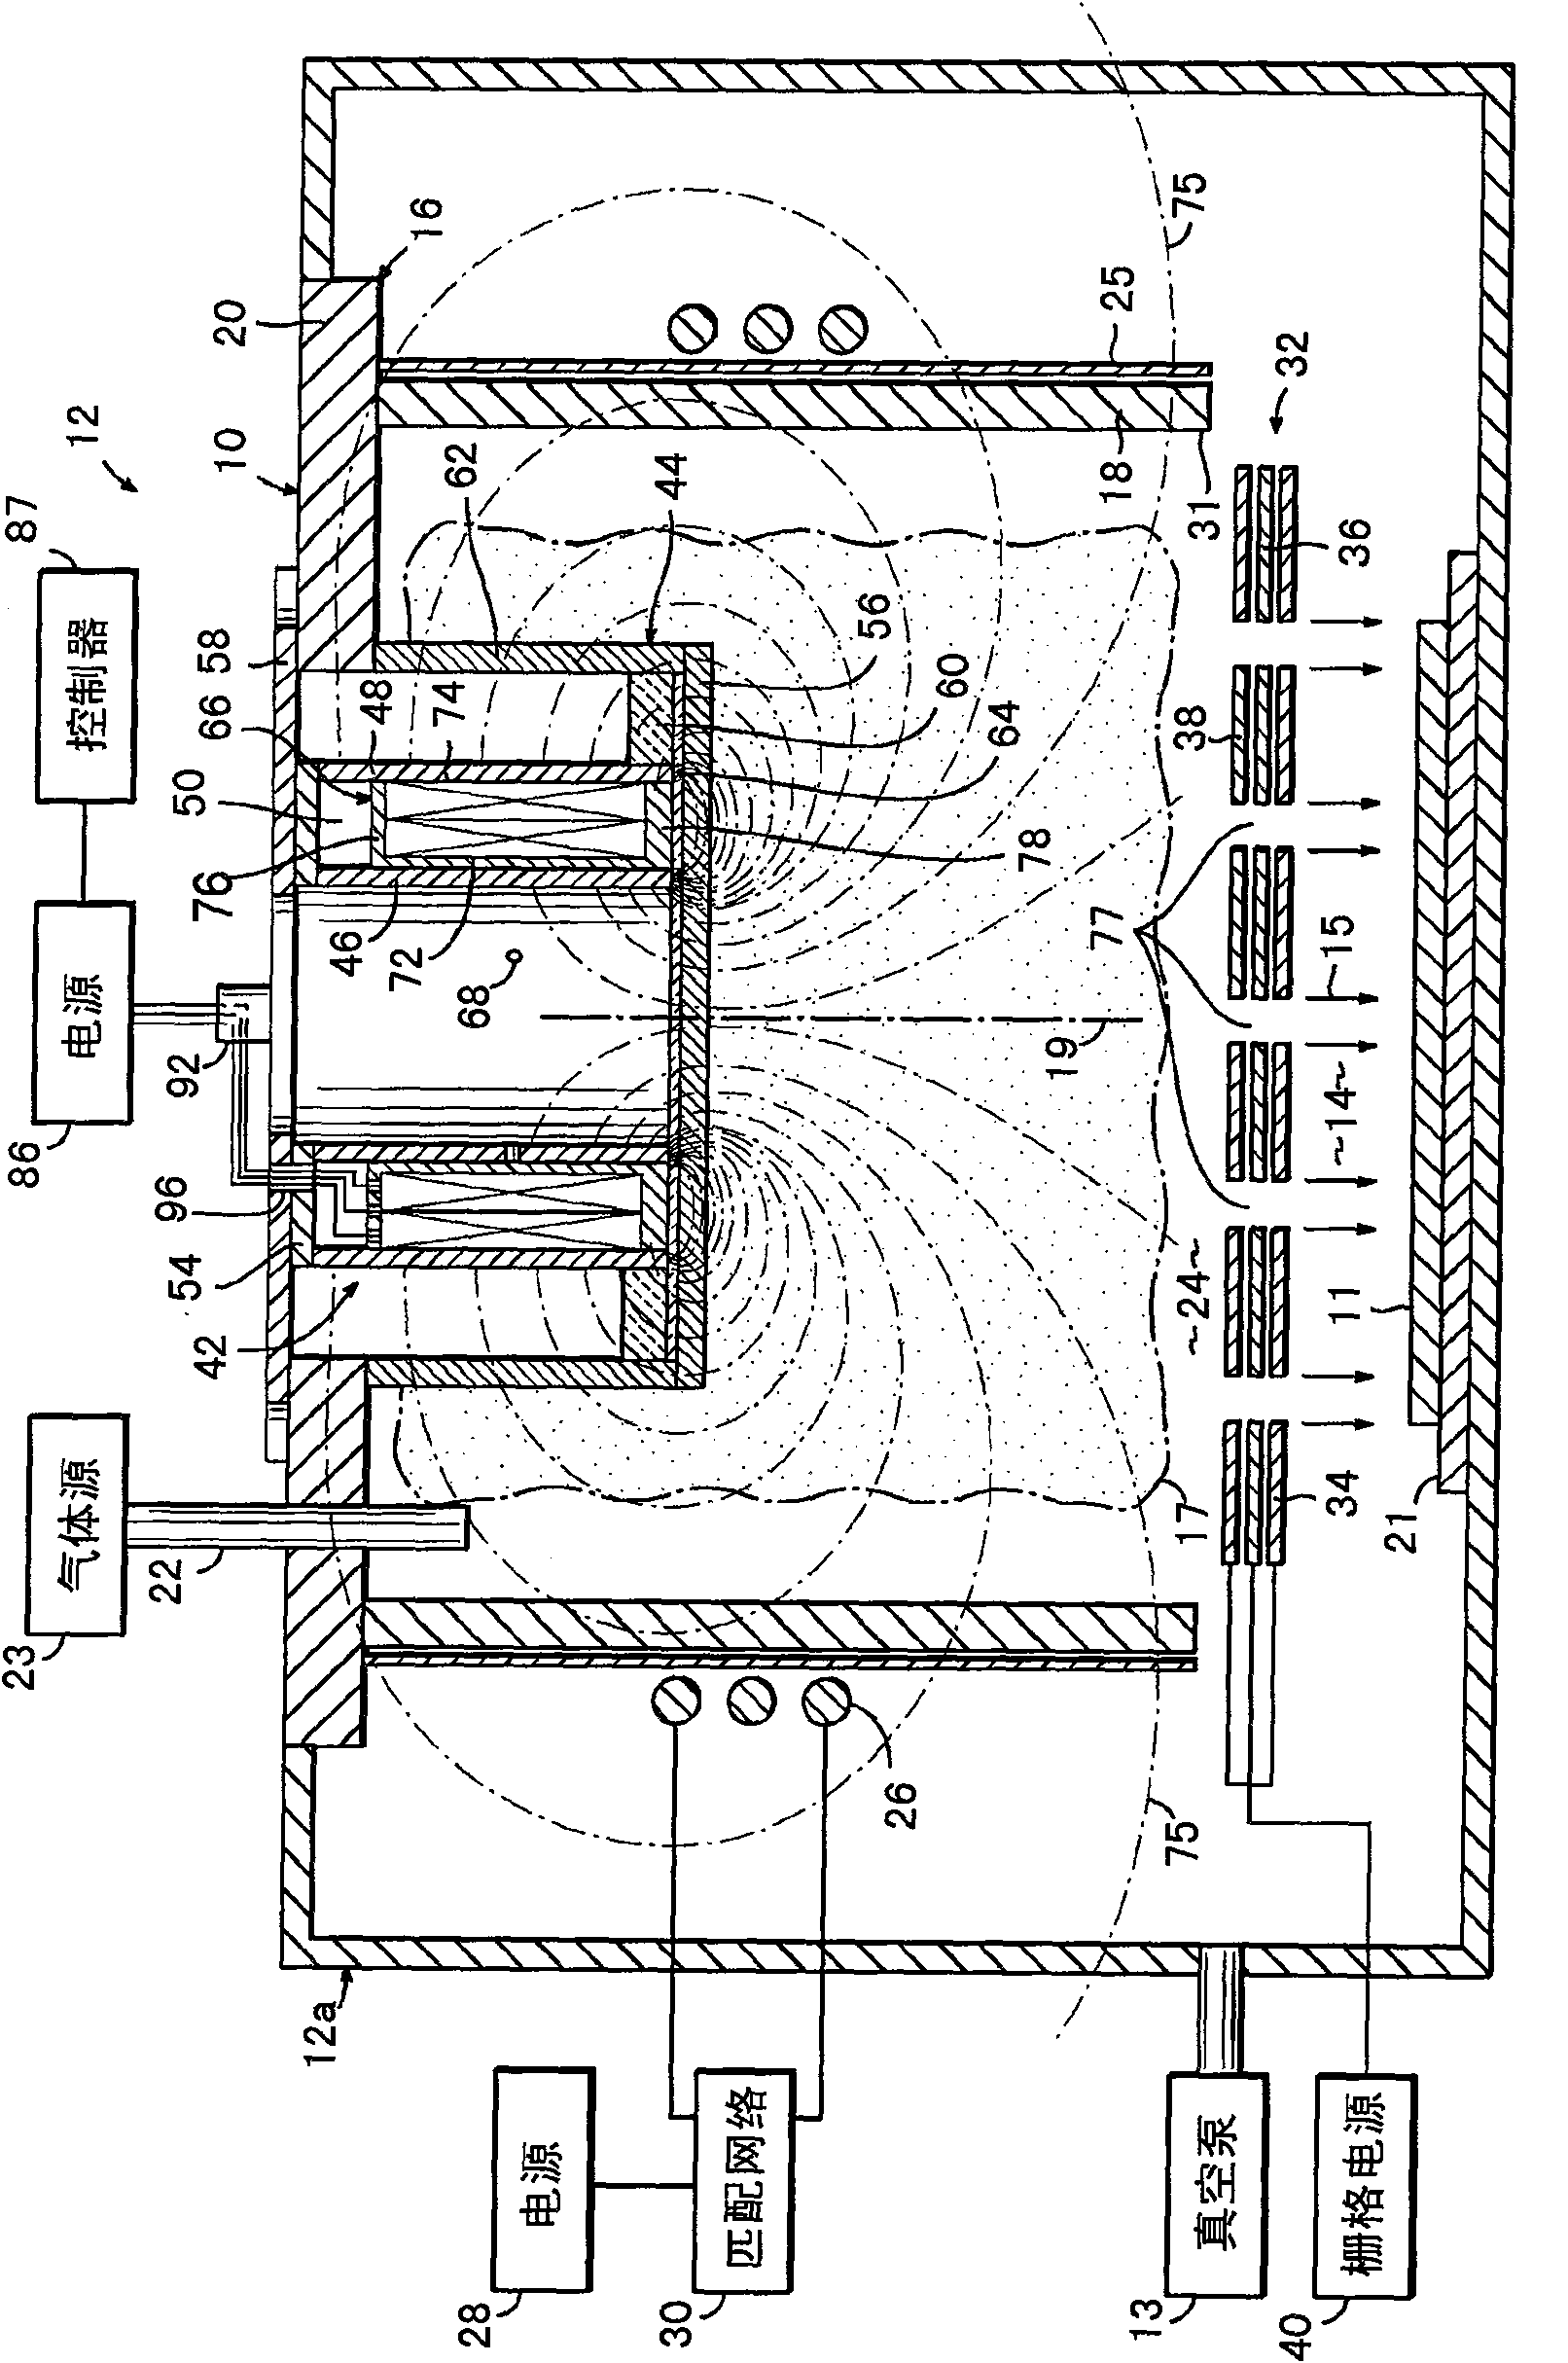 Ion sources and methods of operating an electromagnet of an ion source